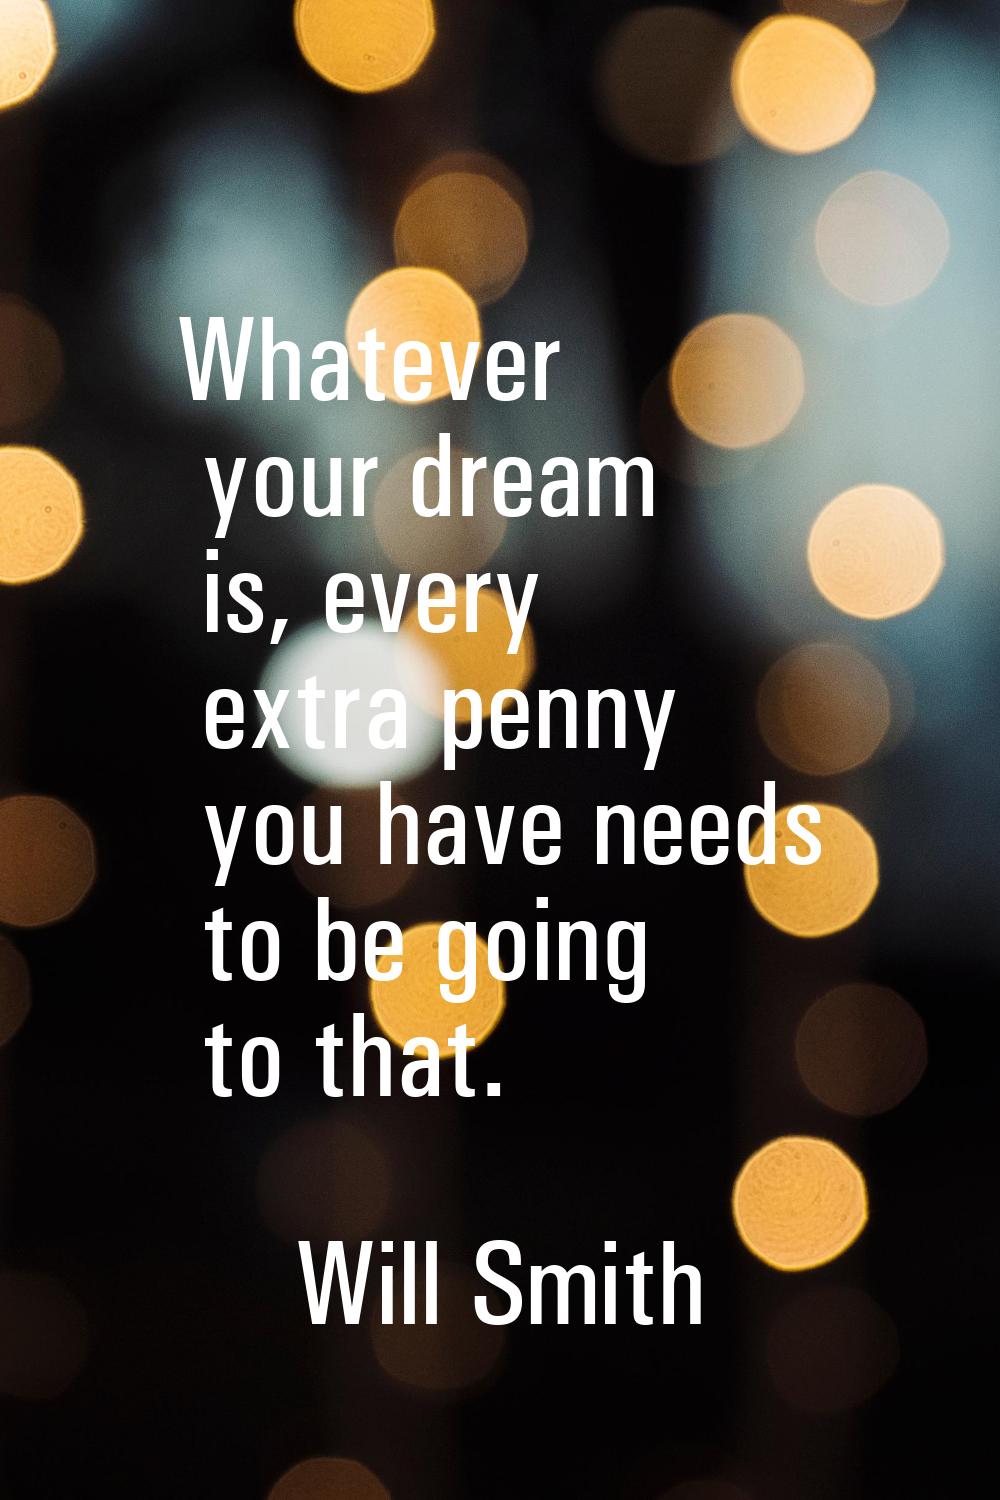 Whatever your dream is, every extra penny you have needs to be going to that.